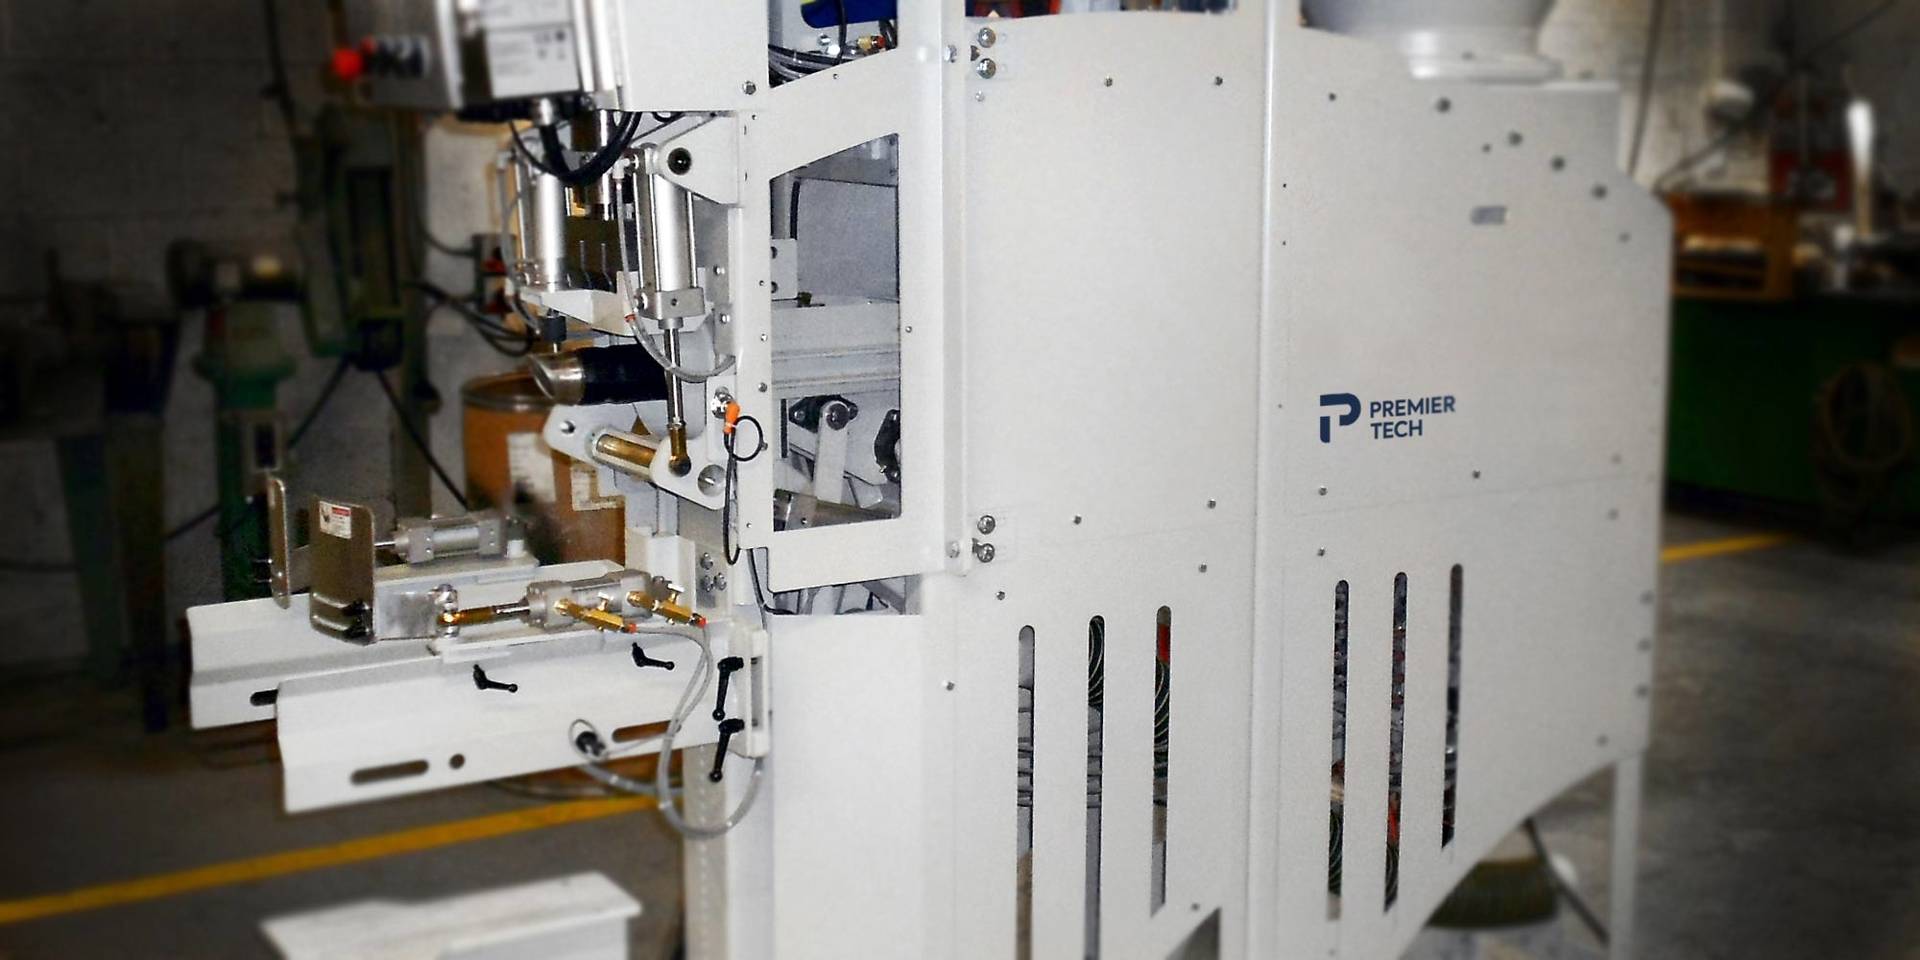 Air packer - packaging equipment in manufacturing plant